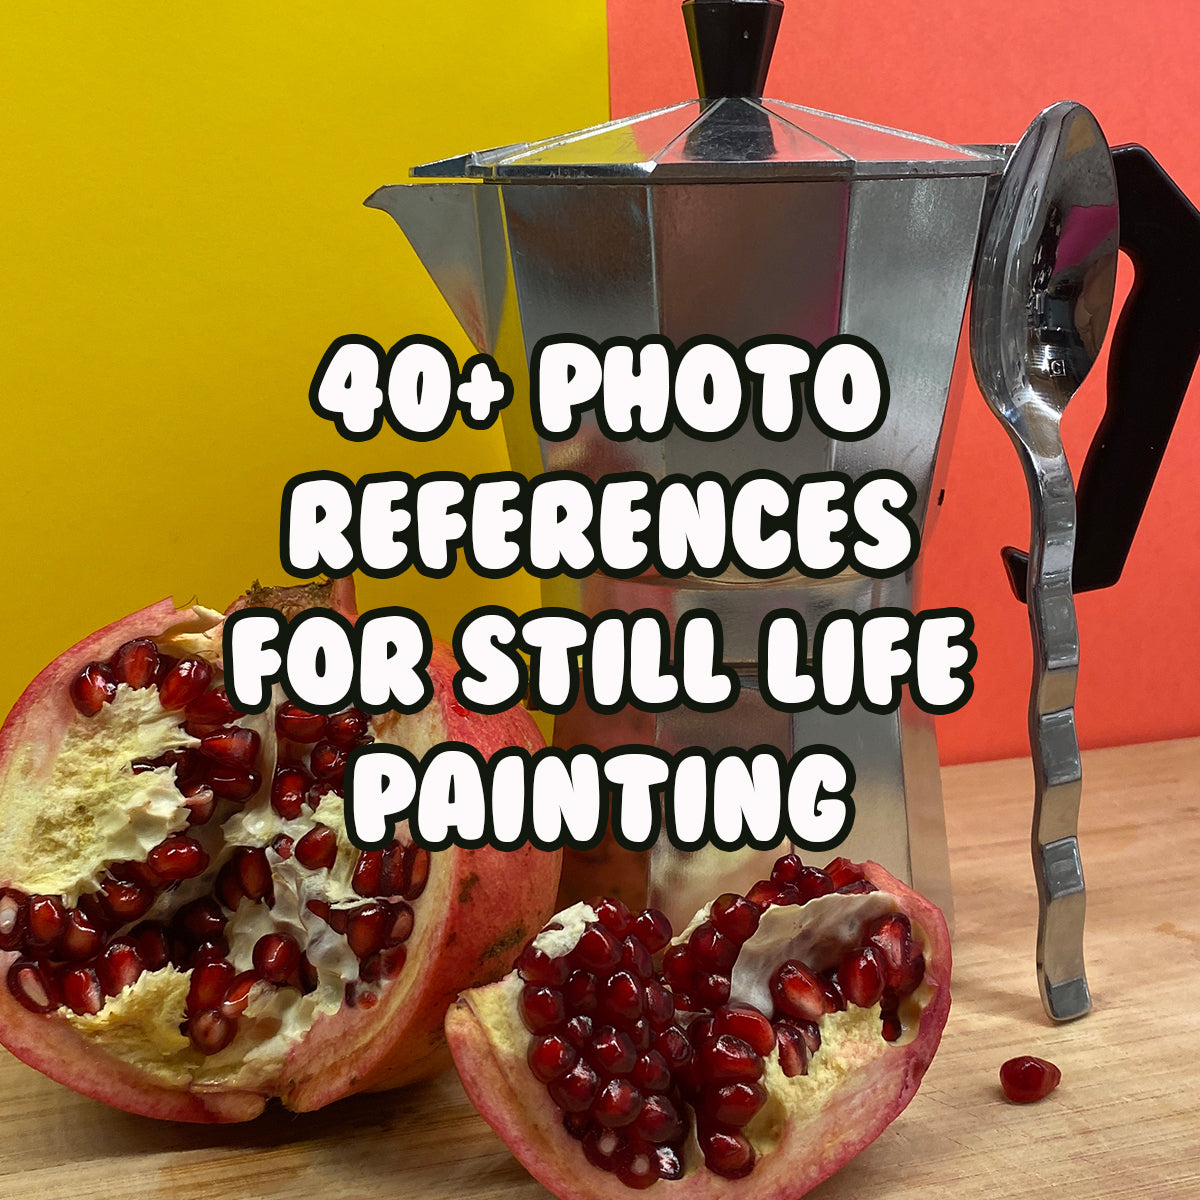 40+ Photo References For Still Life Painting